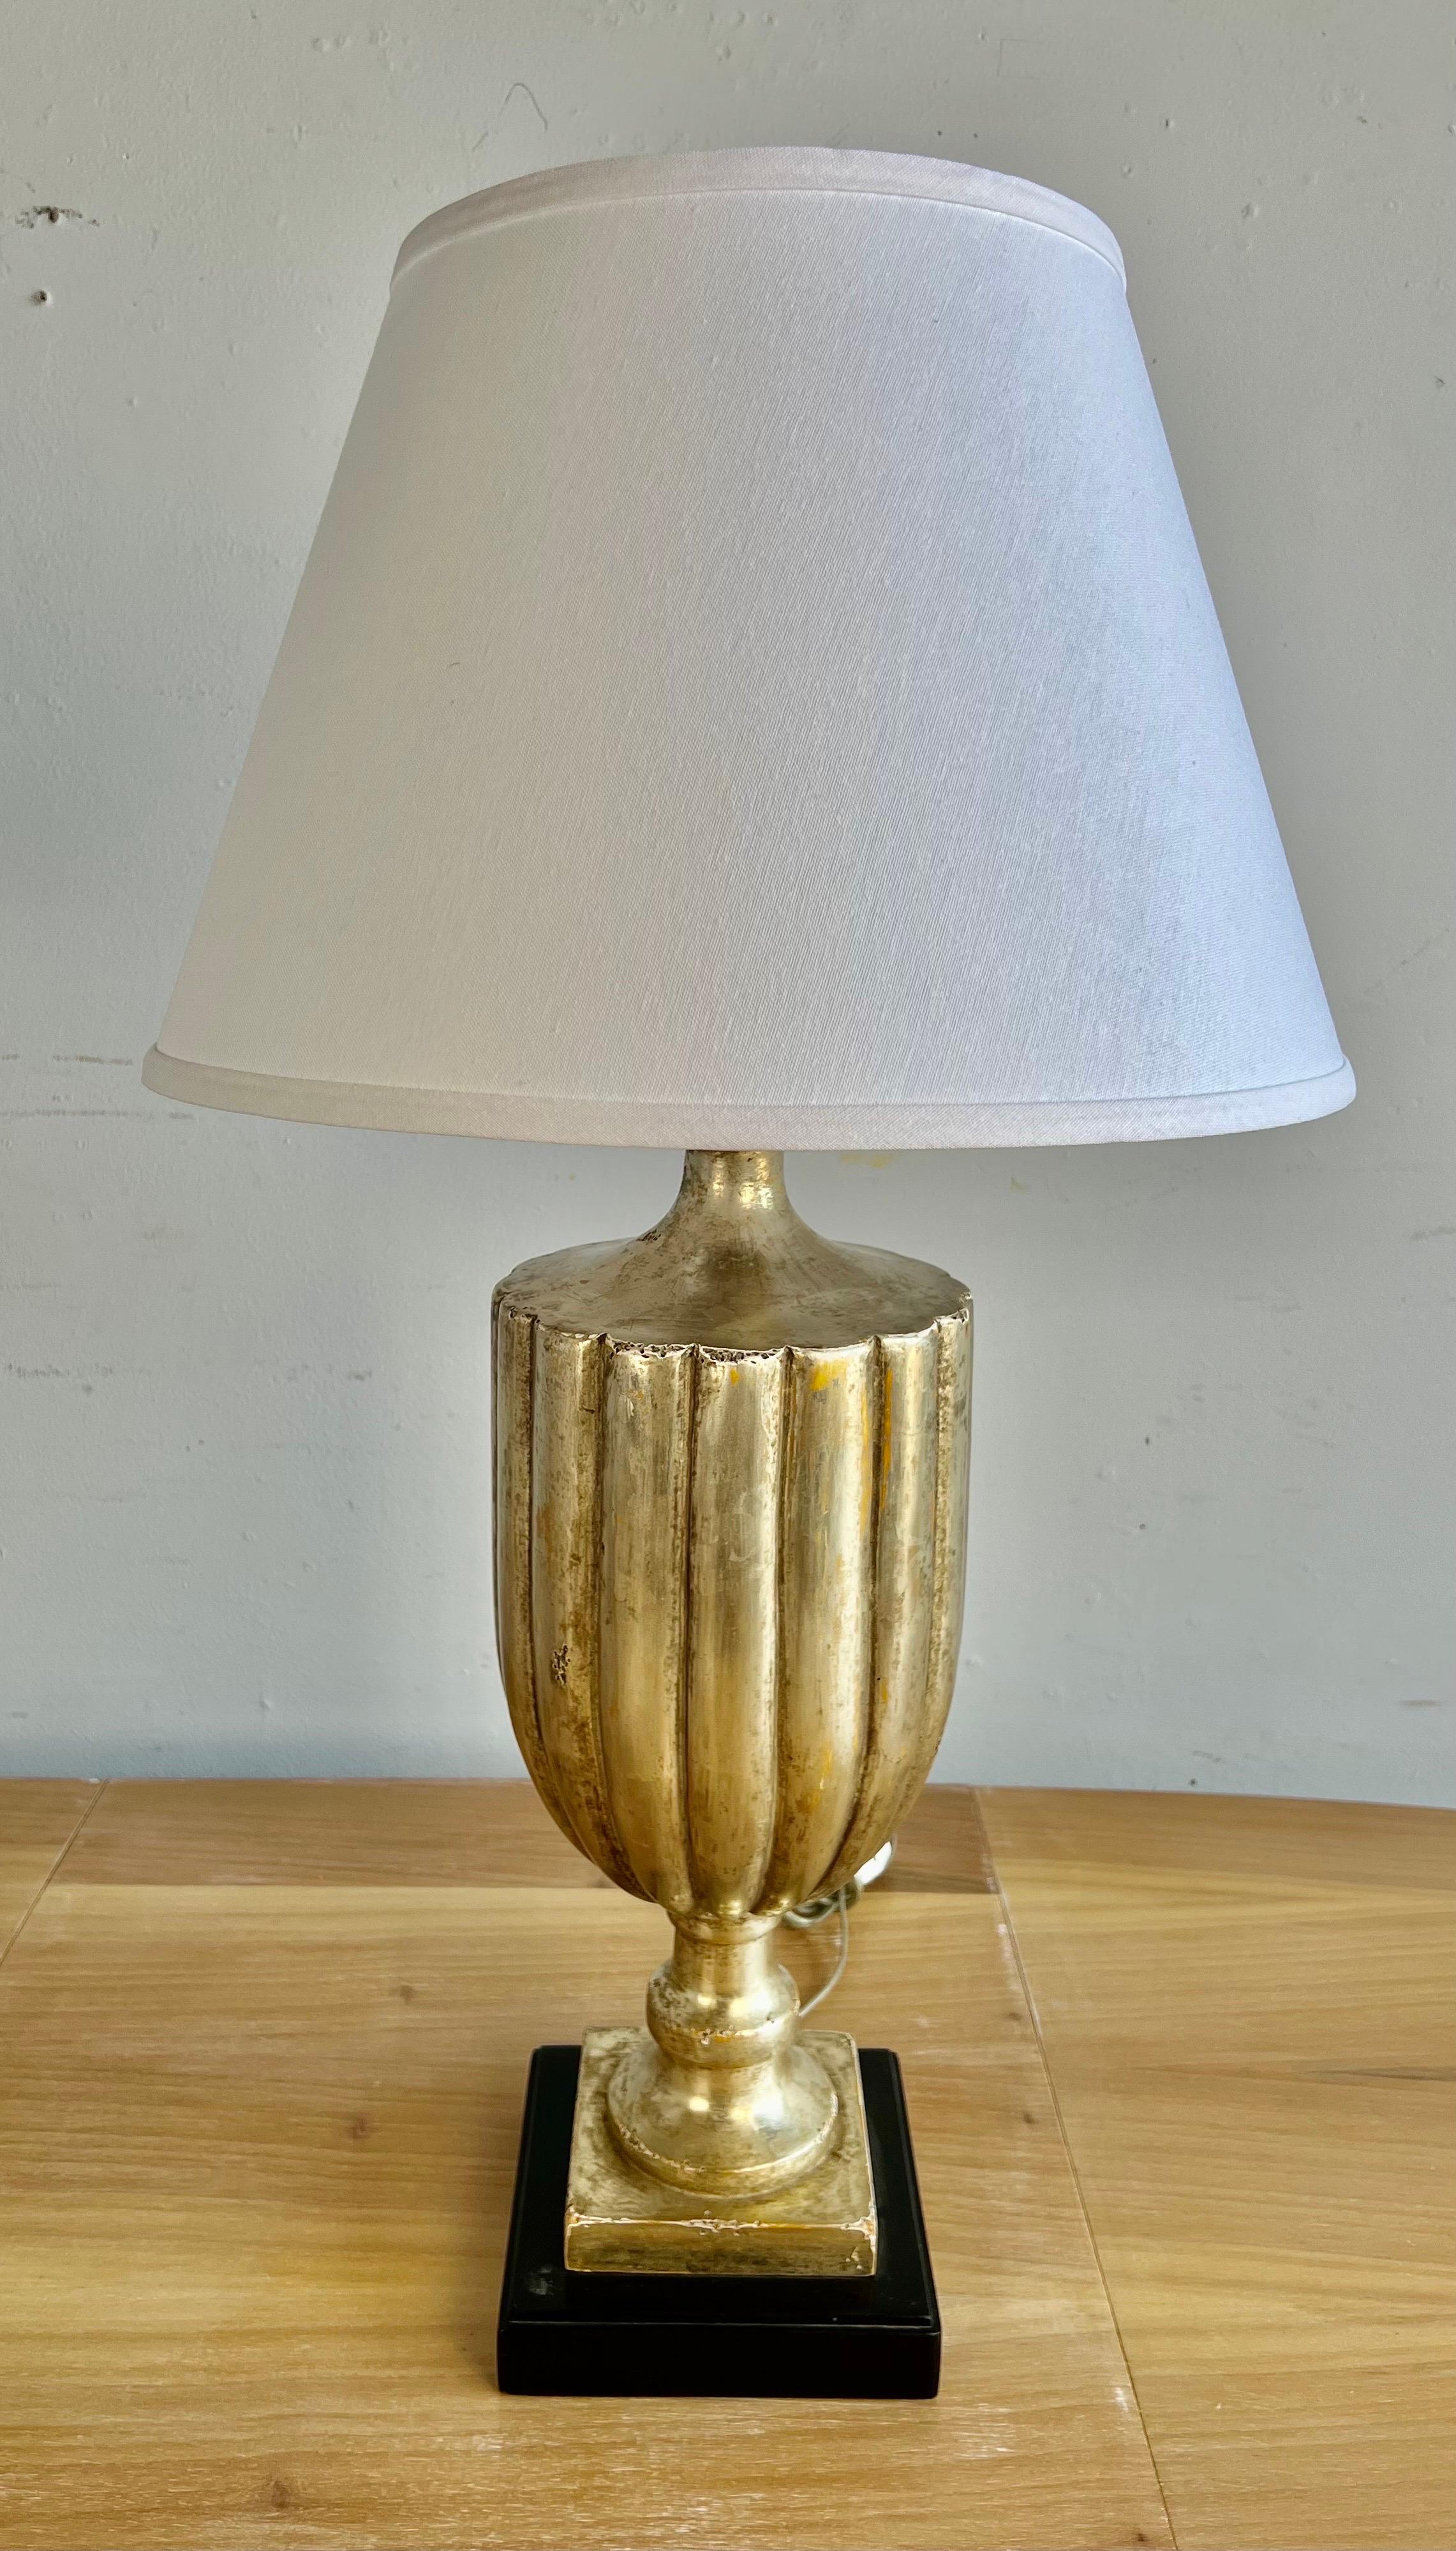 20th Century Pair of Borghese Fluted Urn Lamps w/ Linen Shades For Sale